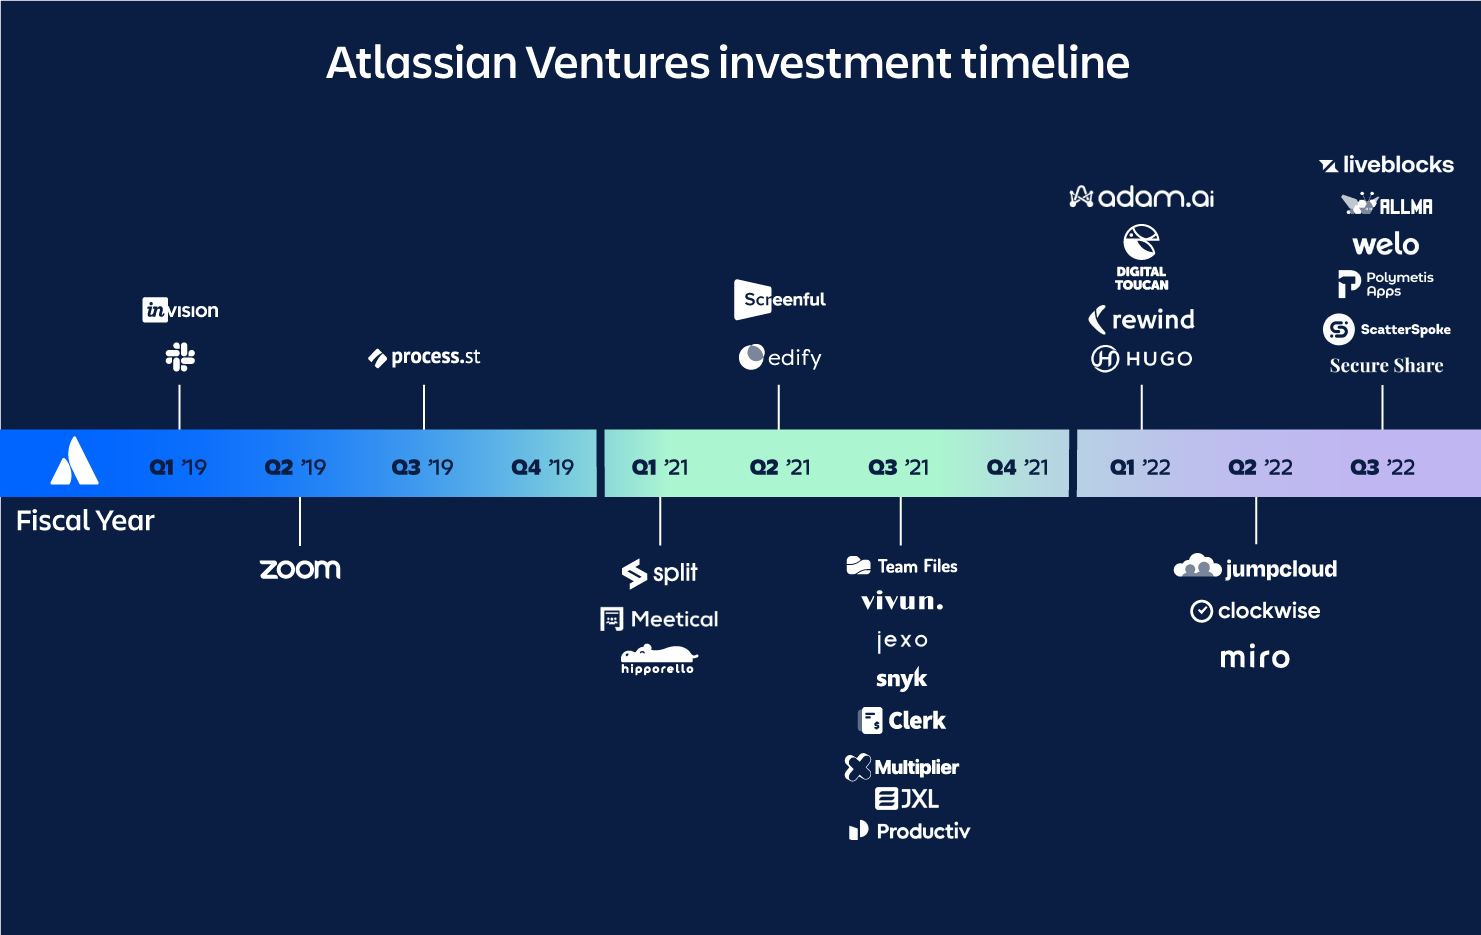 Timeline of Atlassian Ventures' investments. 